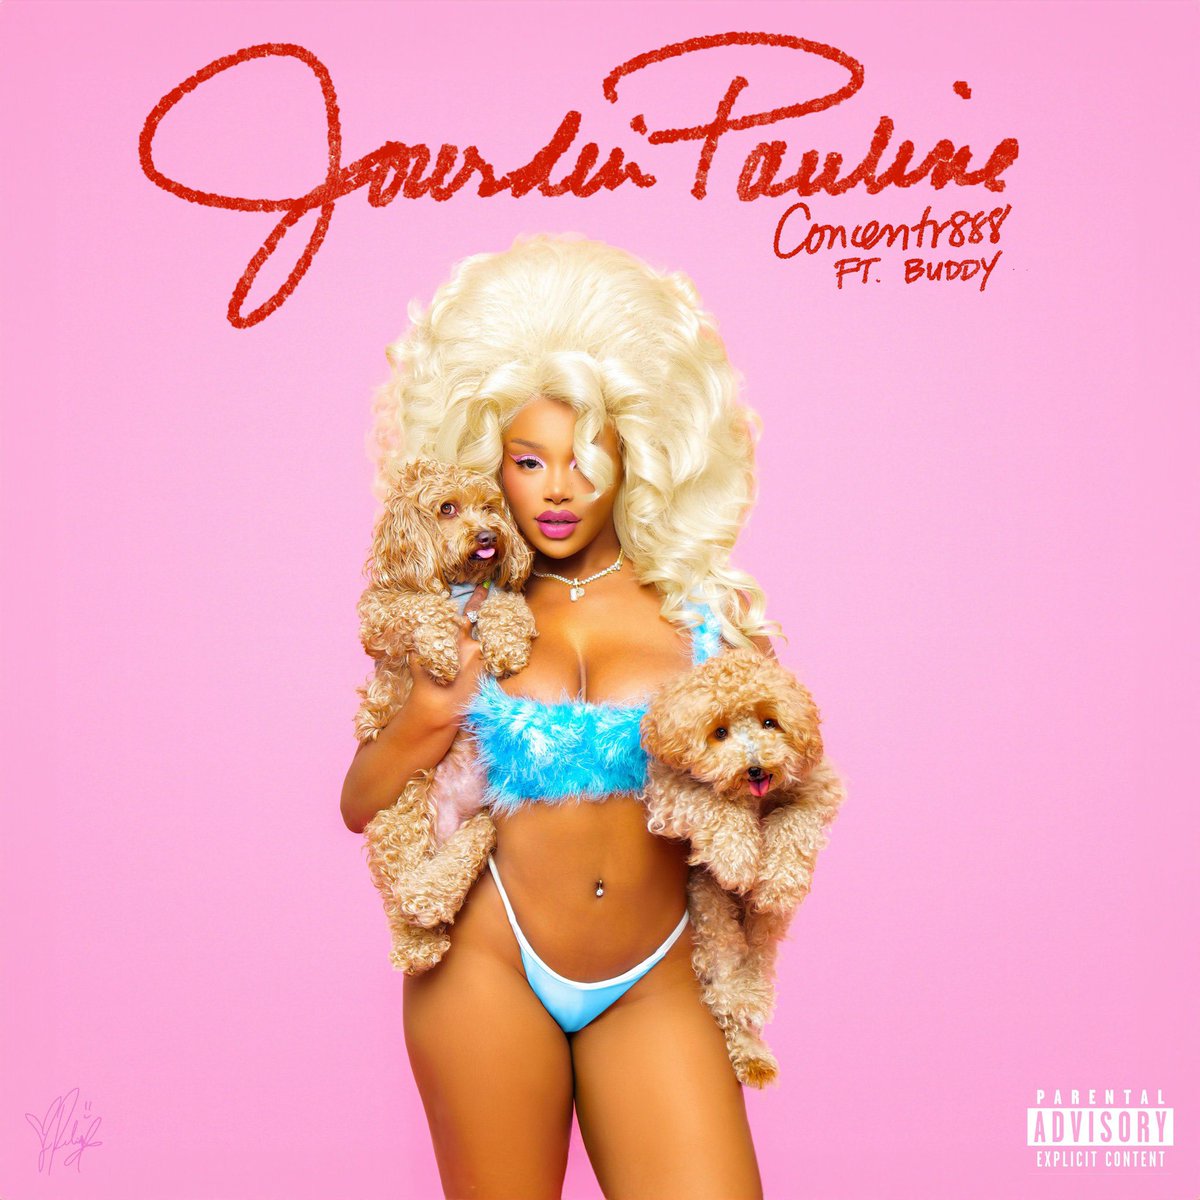 Jourdin Pauline announces her new single “Concentr888” featuring Buddy releasing March 22nd. @JOURDINPAULINE @Buddy